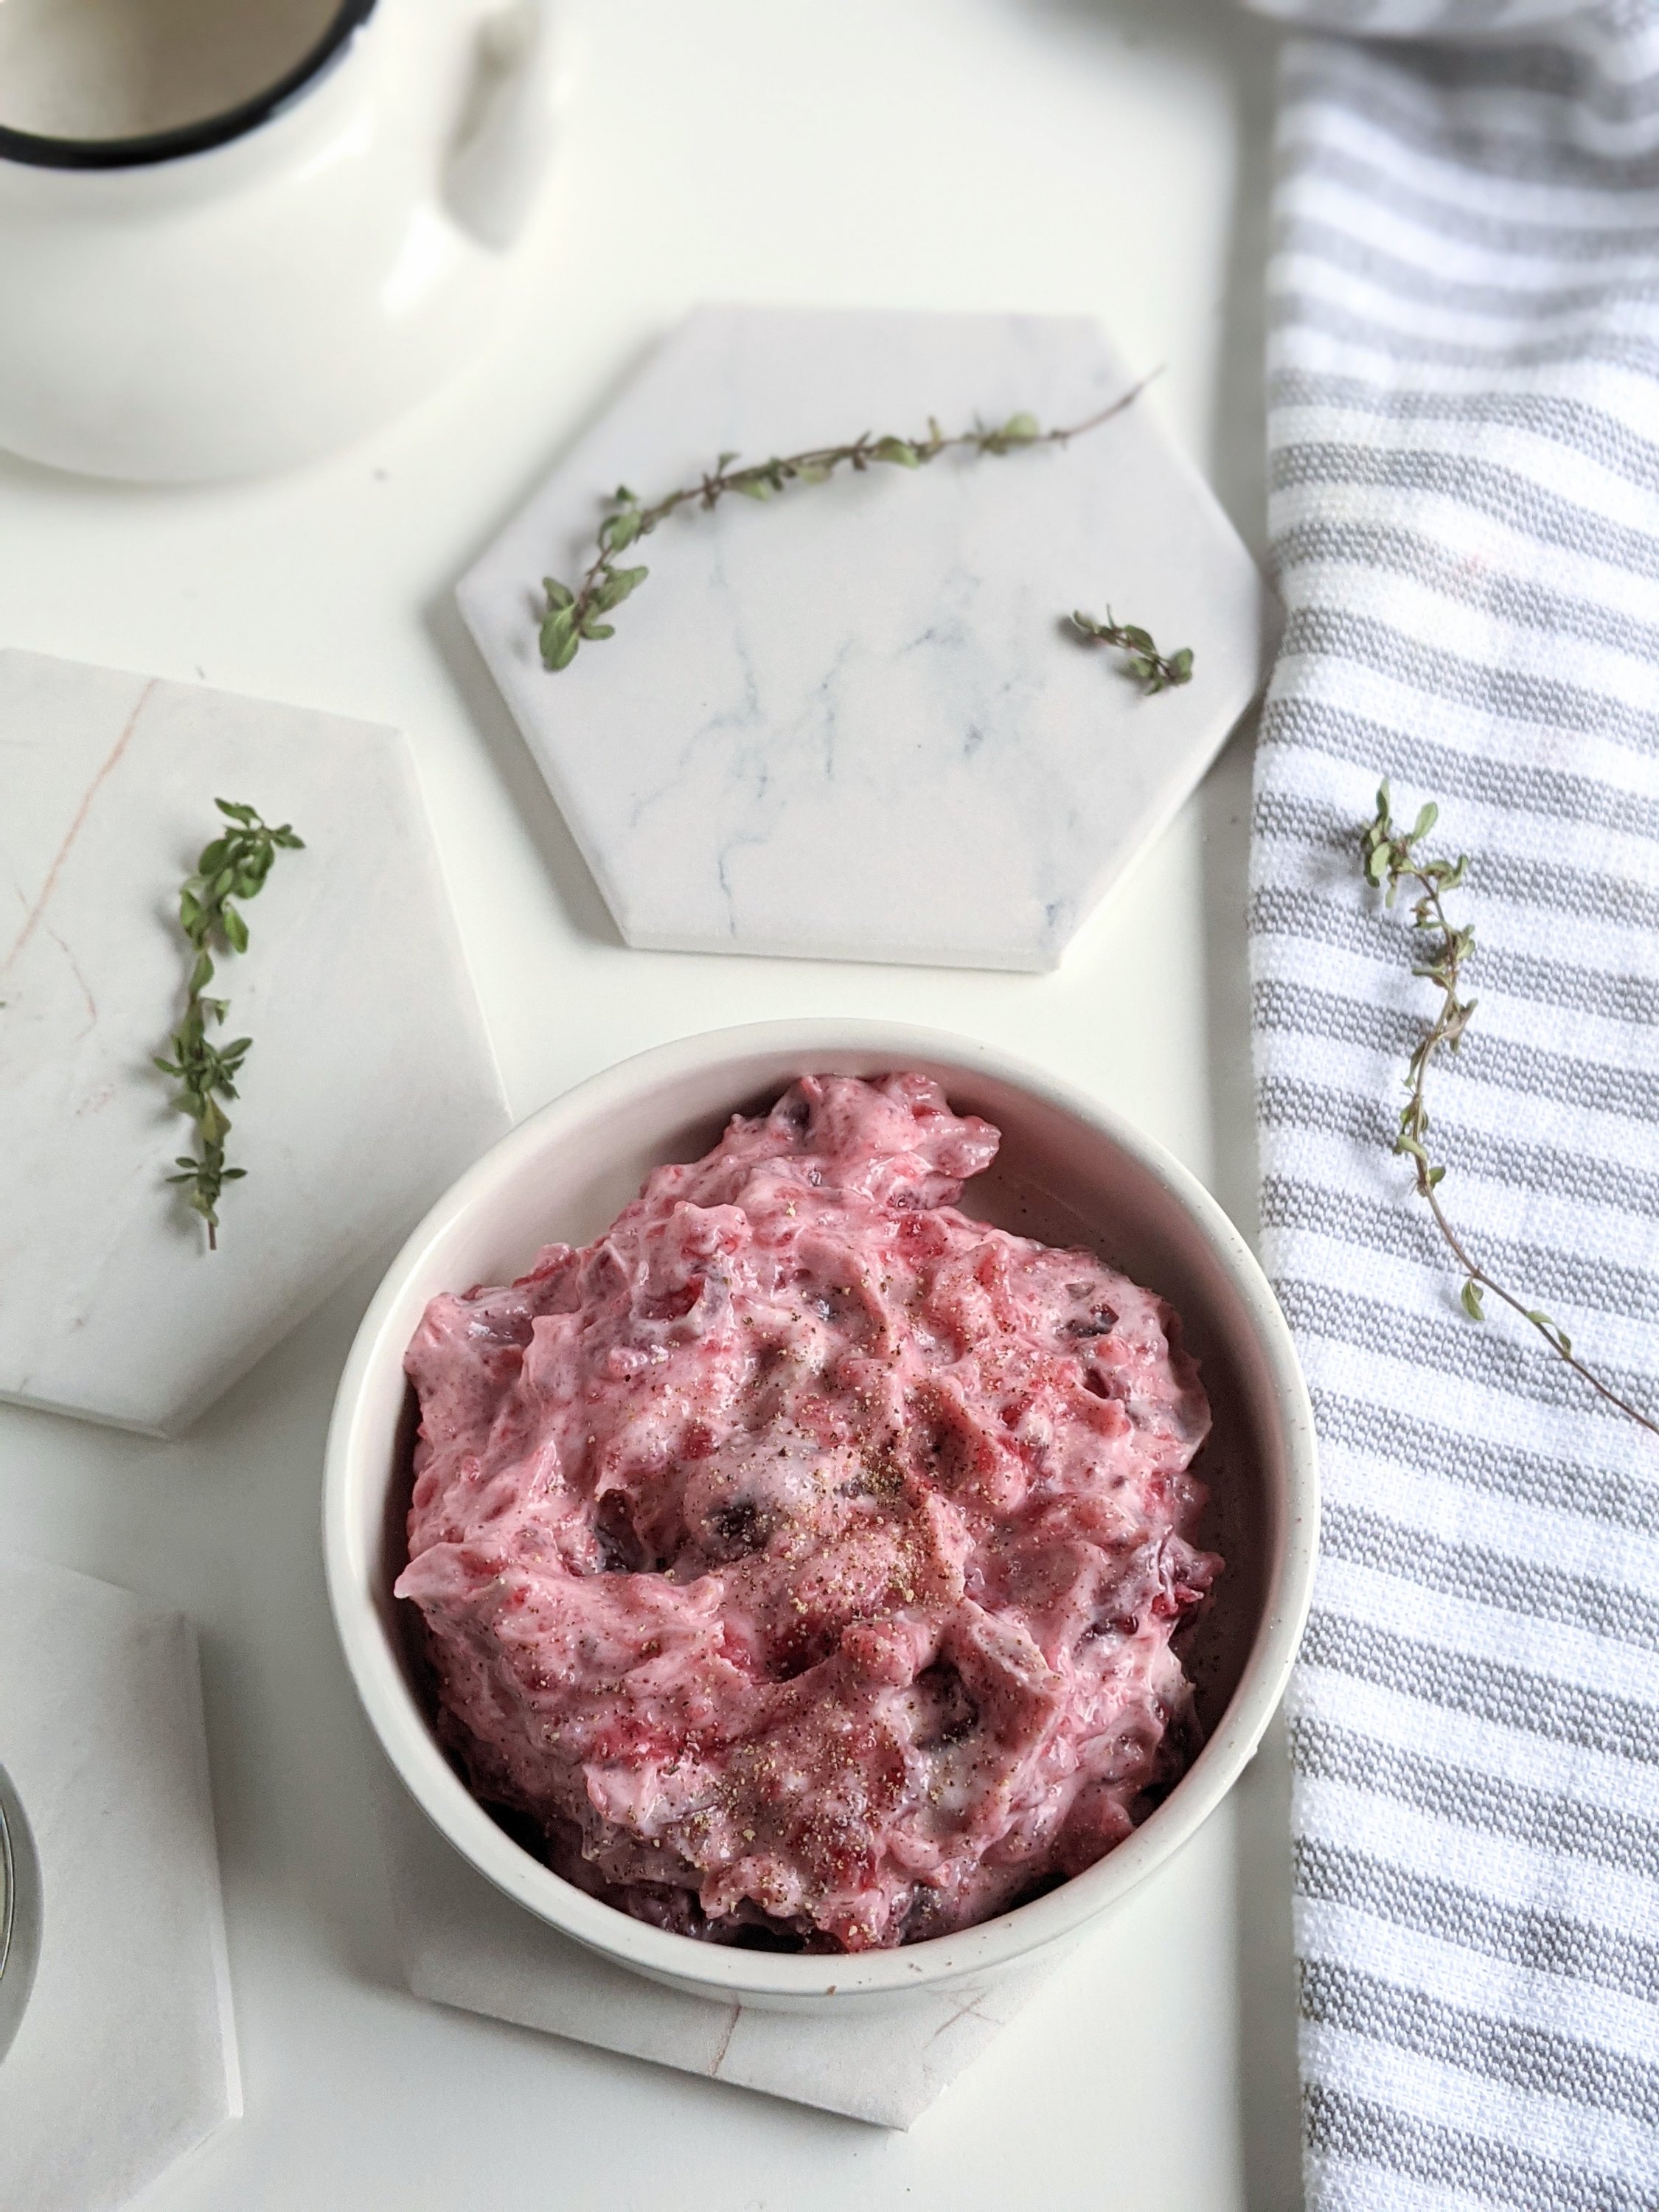 branberry mayo recipe vegan gluten free made with leftover cranberry sauce recipes healthy with garlic herbs and spices